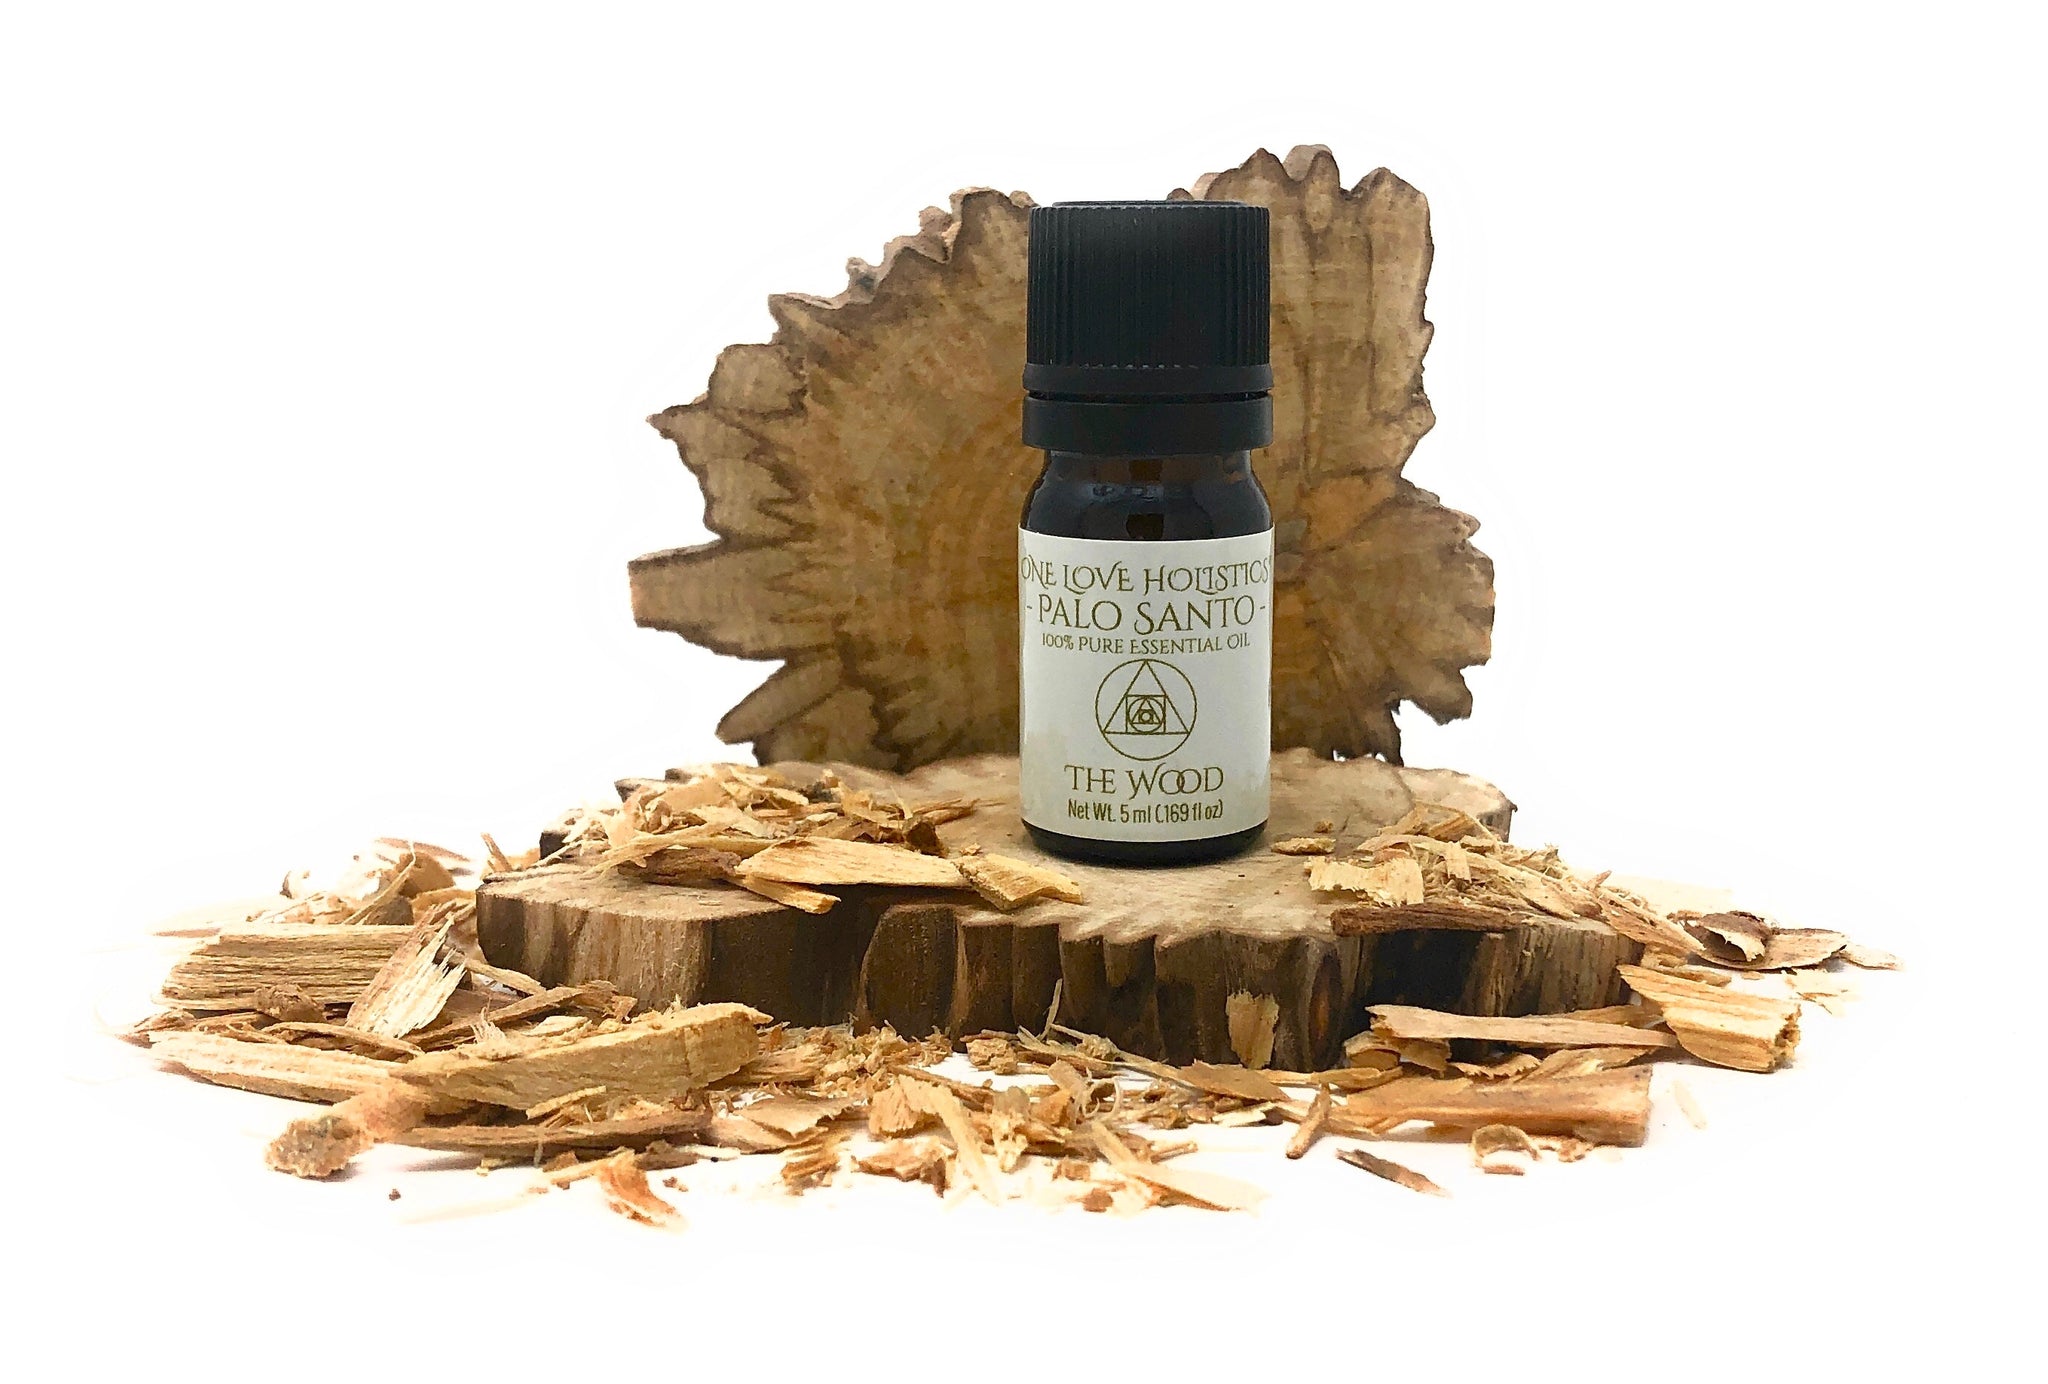 Palo Santo Essential Oil - Pure Organic Essential Oils for Diffuser -  Amarillo Quality - Palo Santo Oil ideal for Aromatherapy and Stress Relief  - 2,5